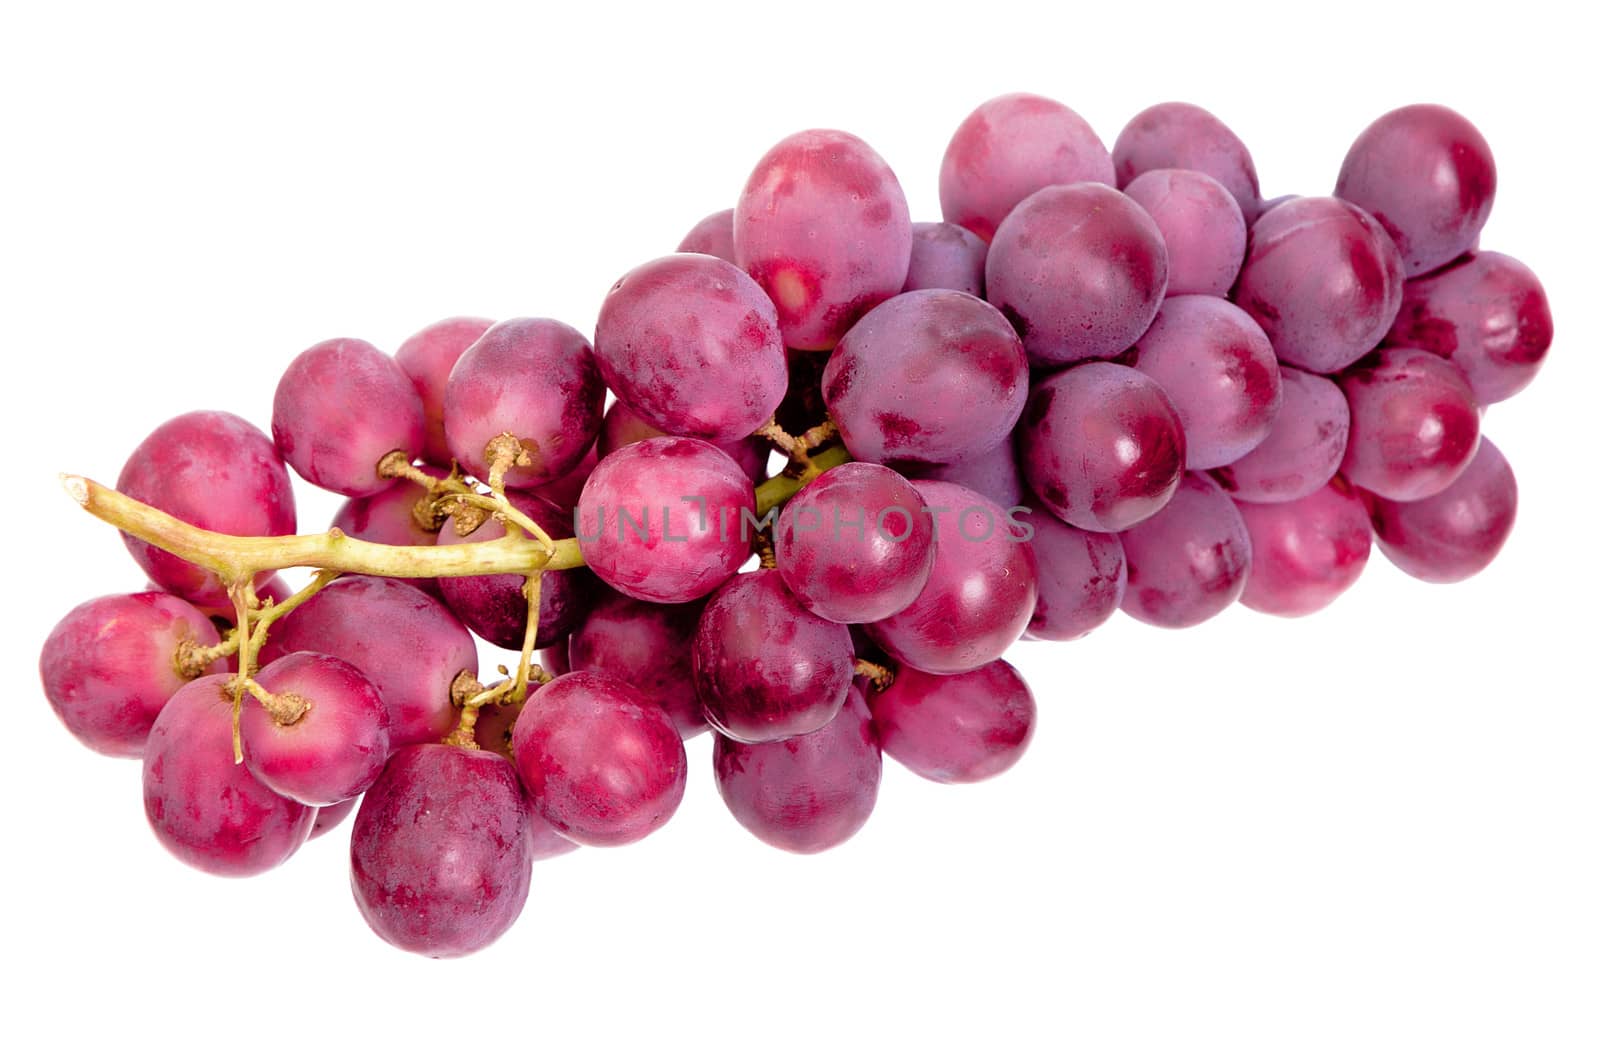 bunch of red grapes isolated on white background